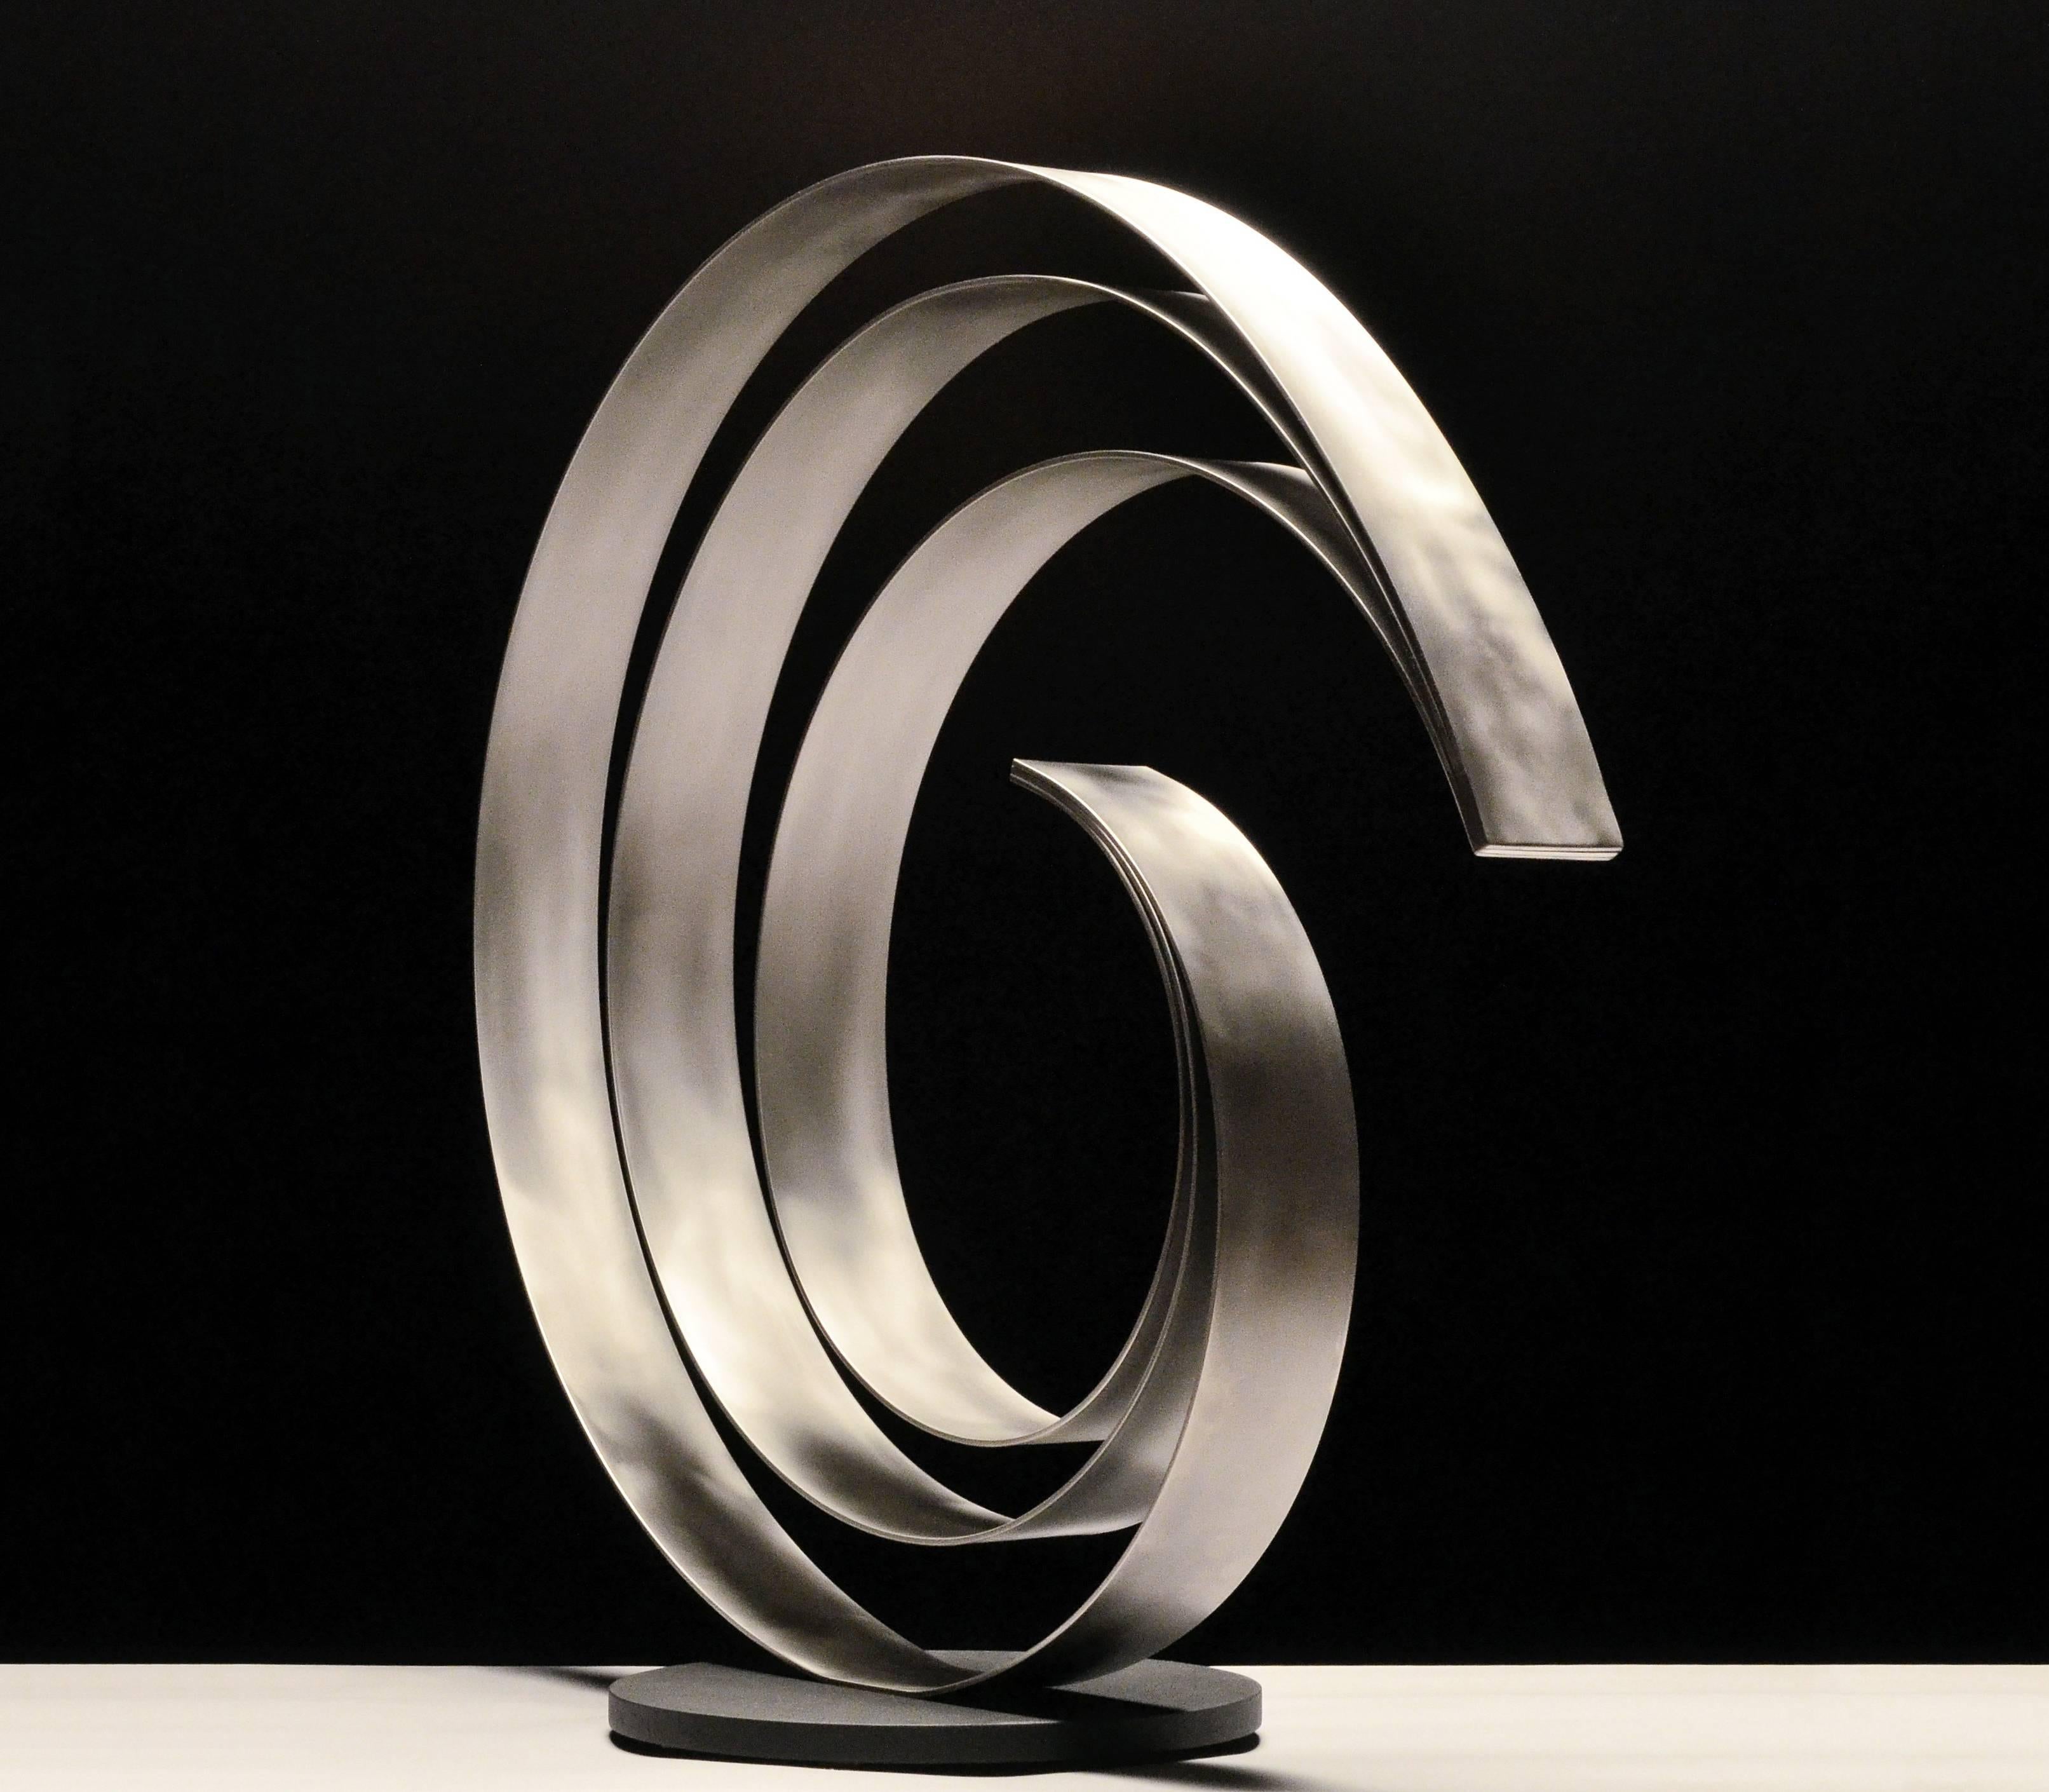 Knot #74S 1/12 - Black Abstract Sculpture by Damon Hyldreth